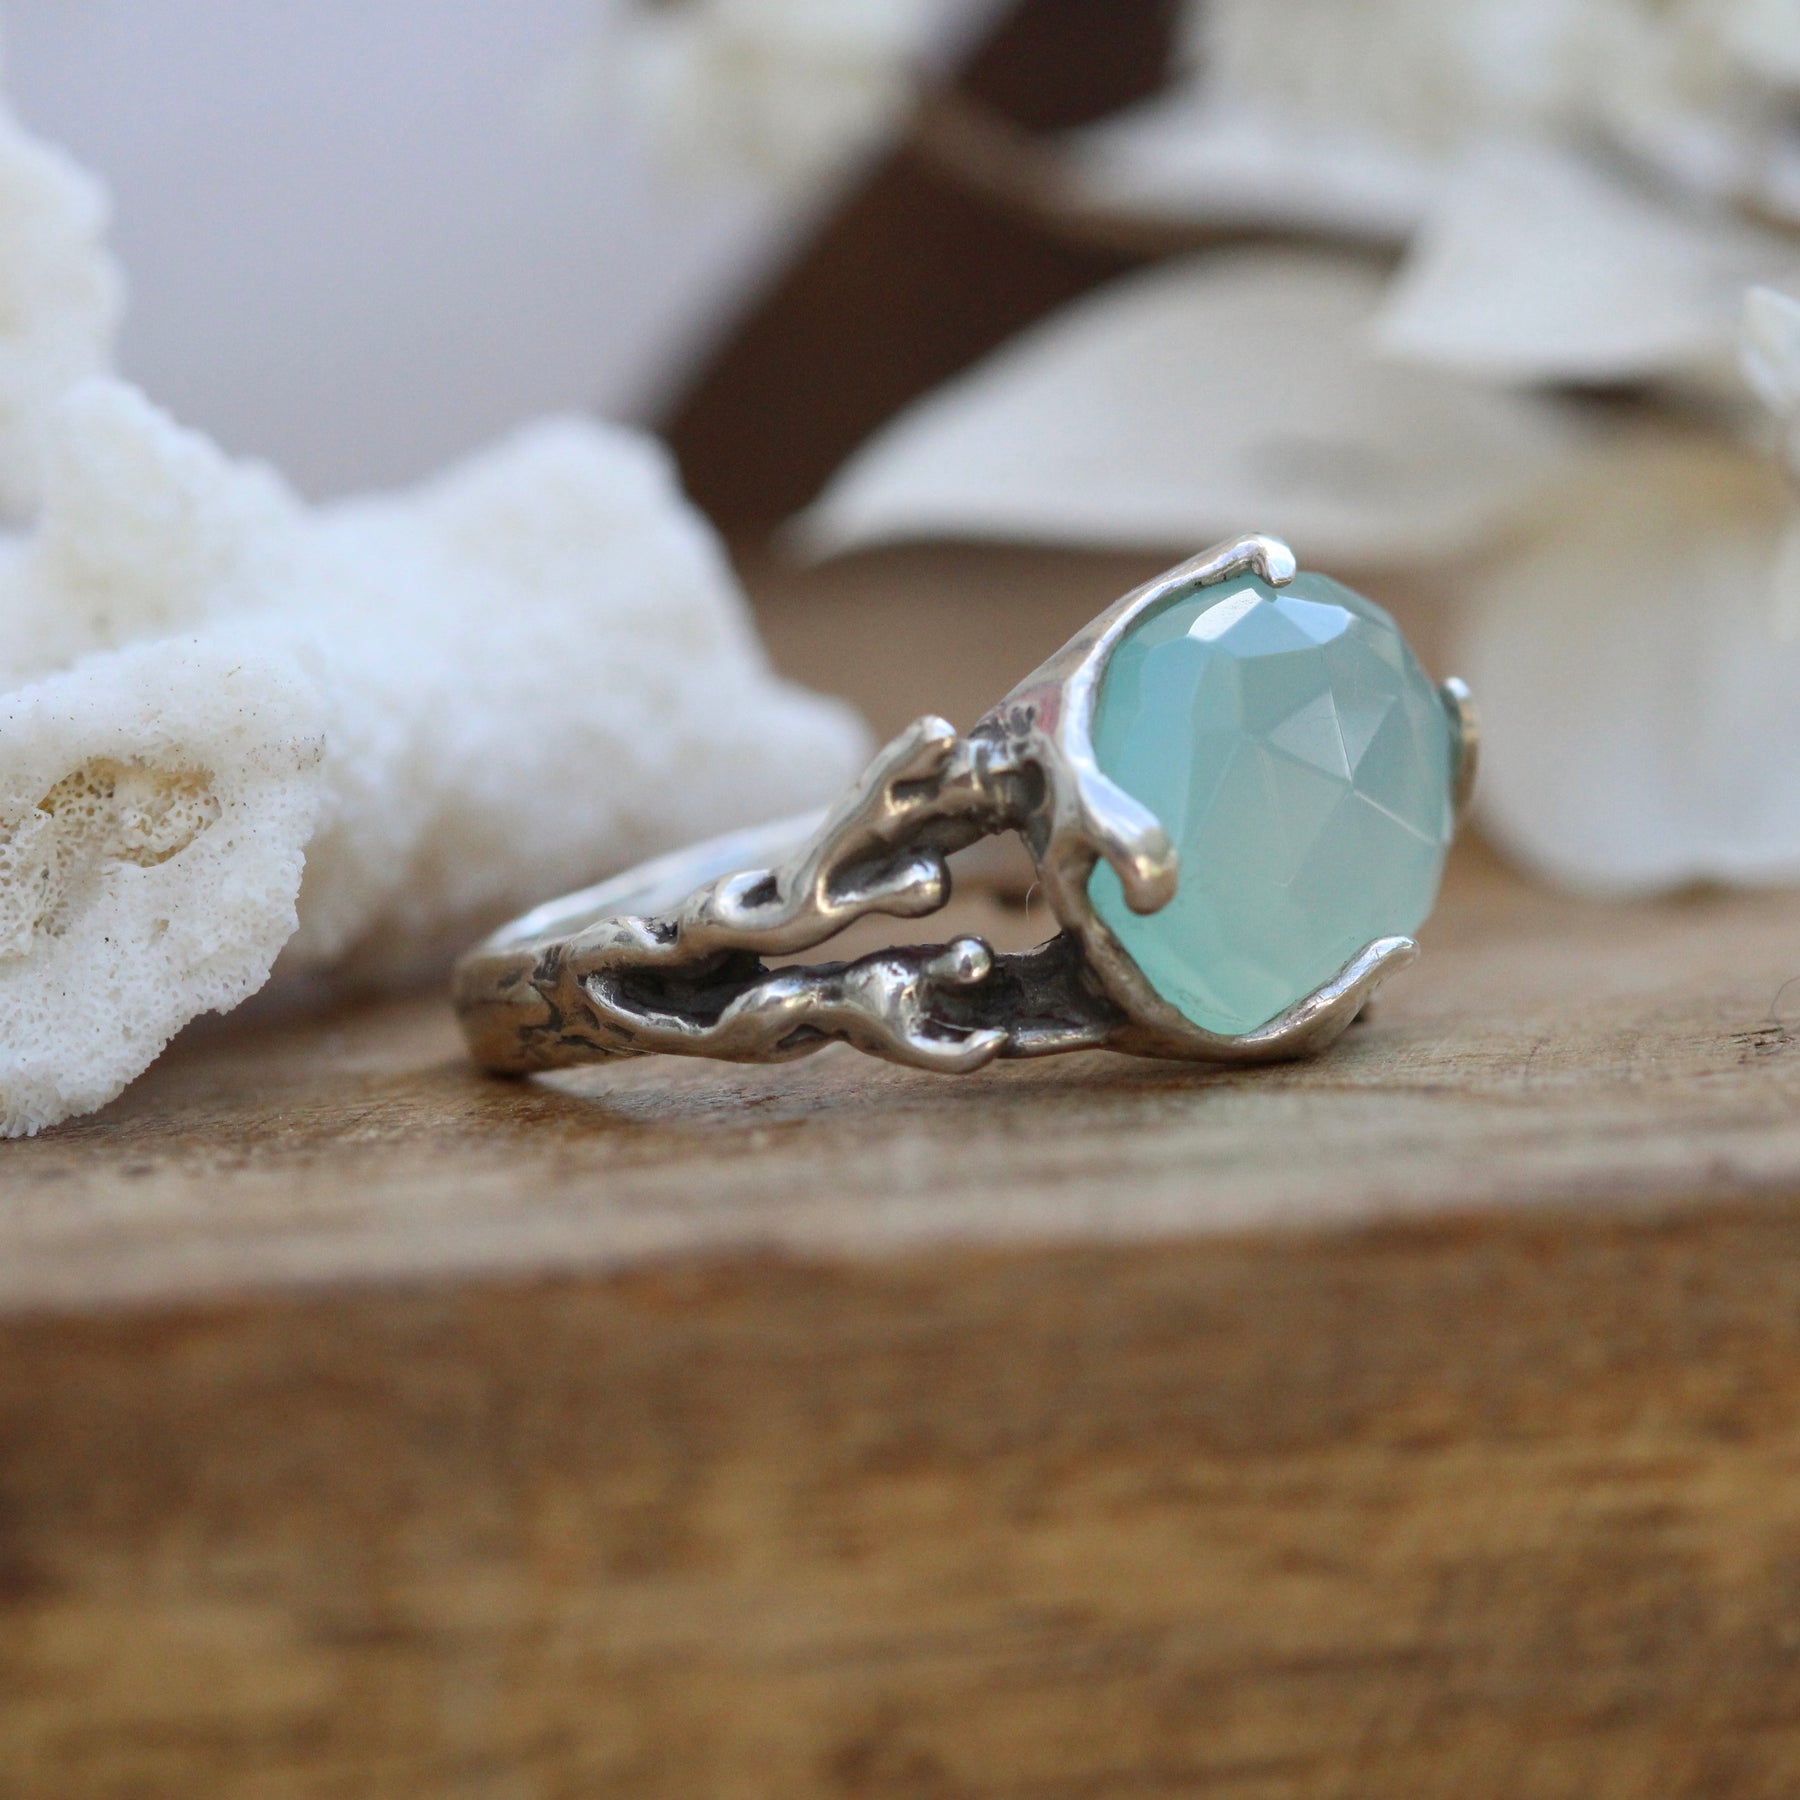 Coral and Aqua Chalcedony sterling silver one of a kind ring Beach Comber Collelction